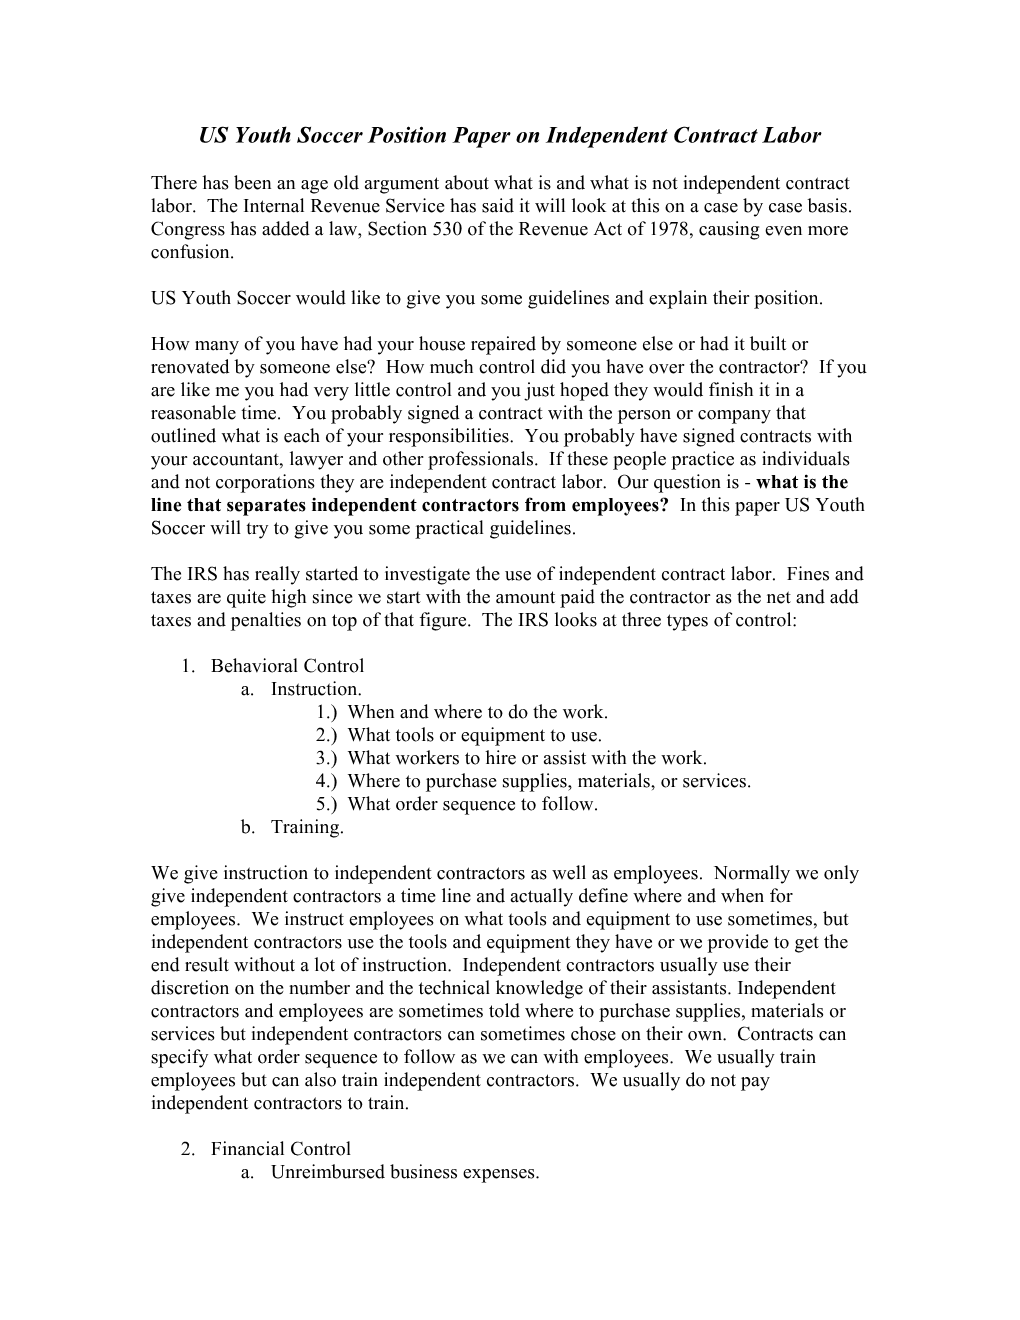 US Youth Soccer Position Paper on Contract Labor